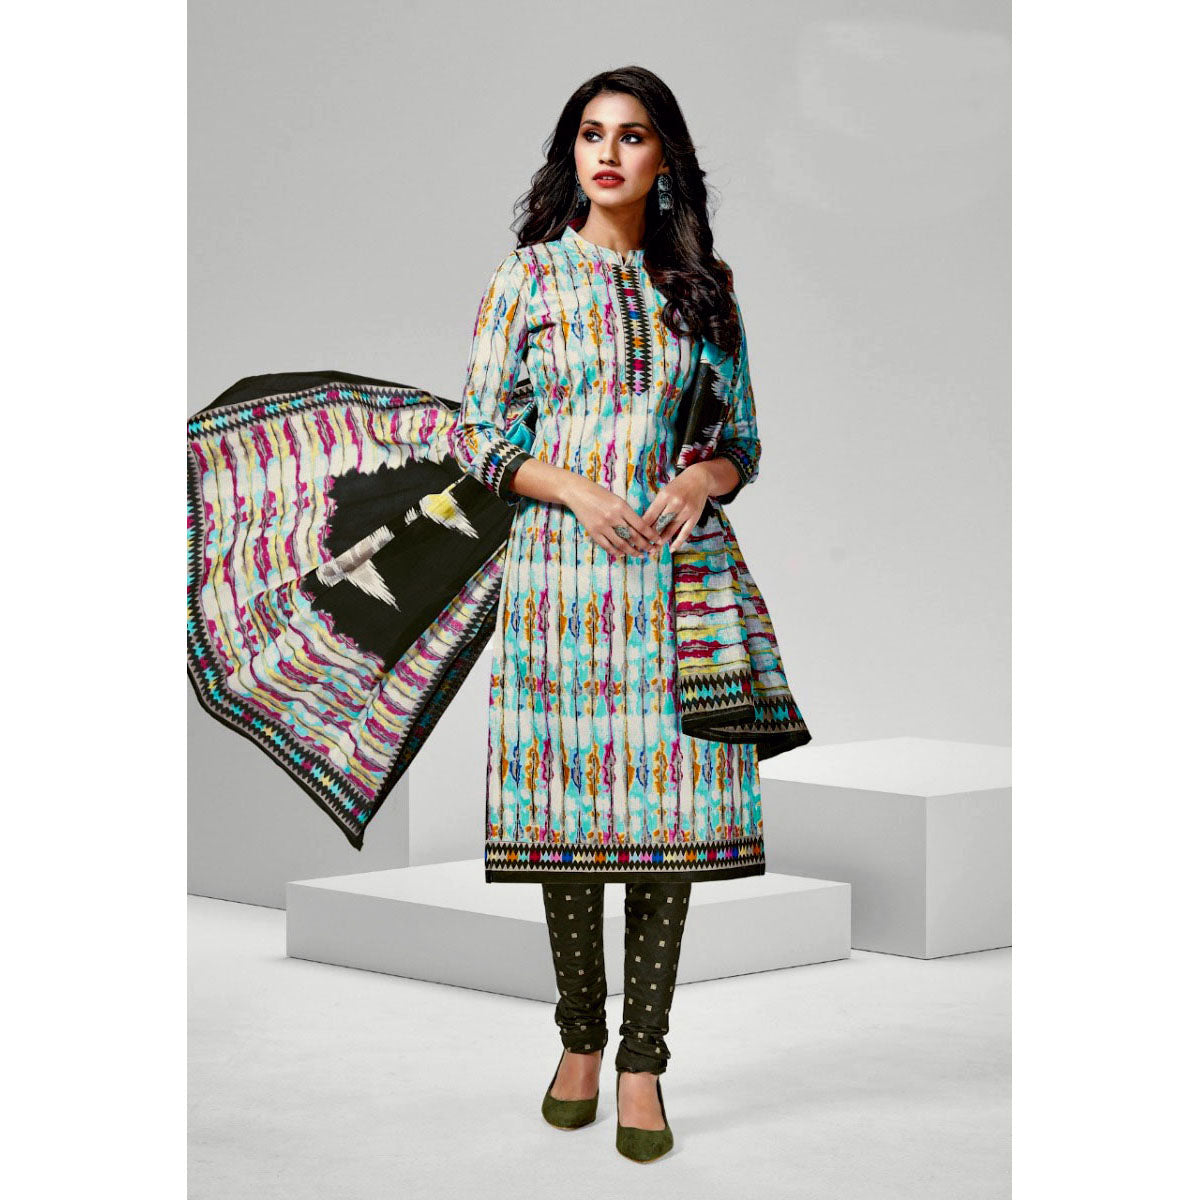 OFF WHITE-TURQUOISE-DARK OLIVE GREEN PRINTED COTTON UNSTITCHED CASUAL SALWAR KAMEEZ SUIT DRESS MATERIAL LADIES DEN